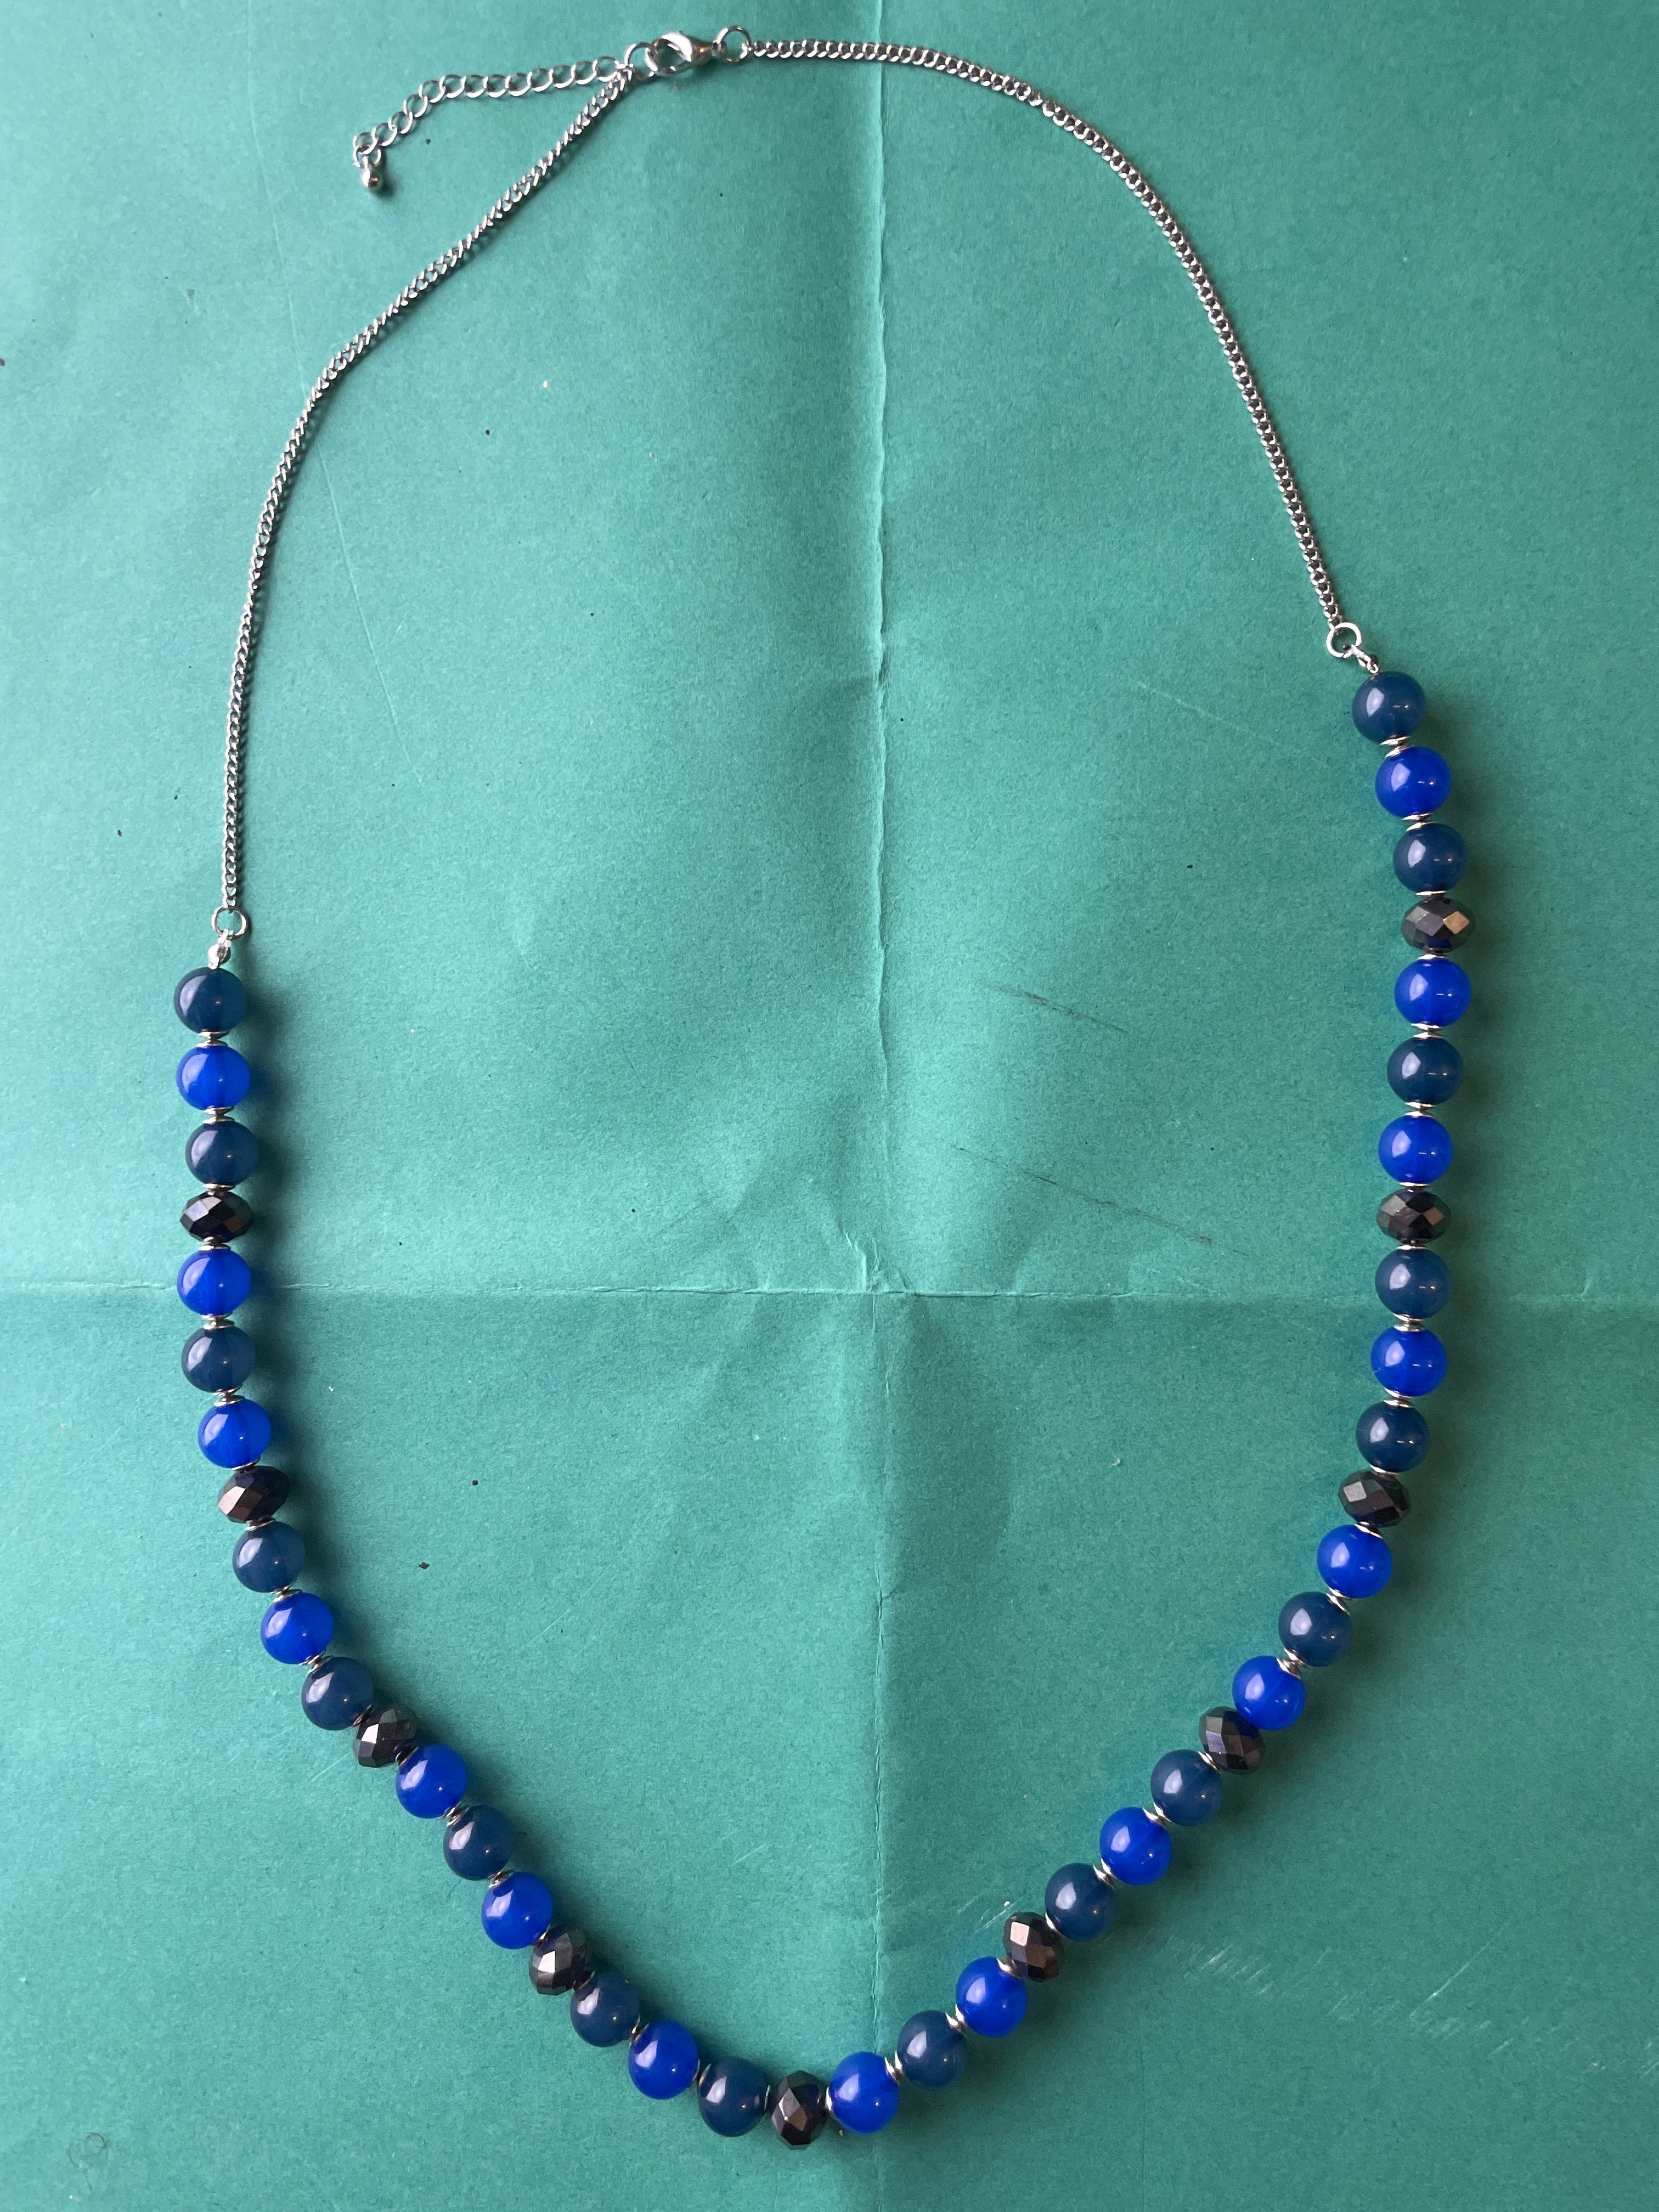 GOAH Silver chain women's necklace with blue beads